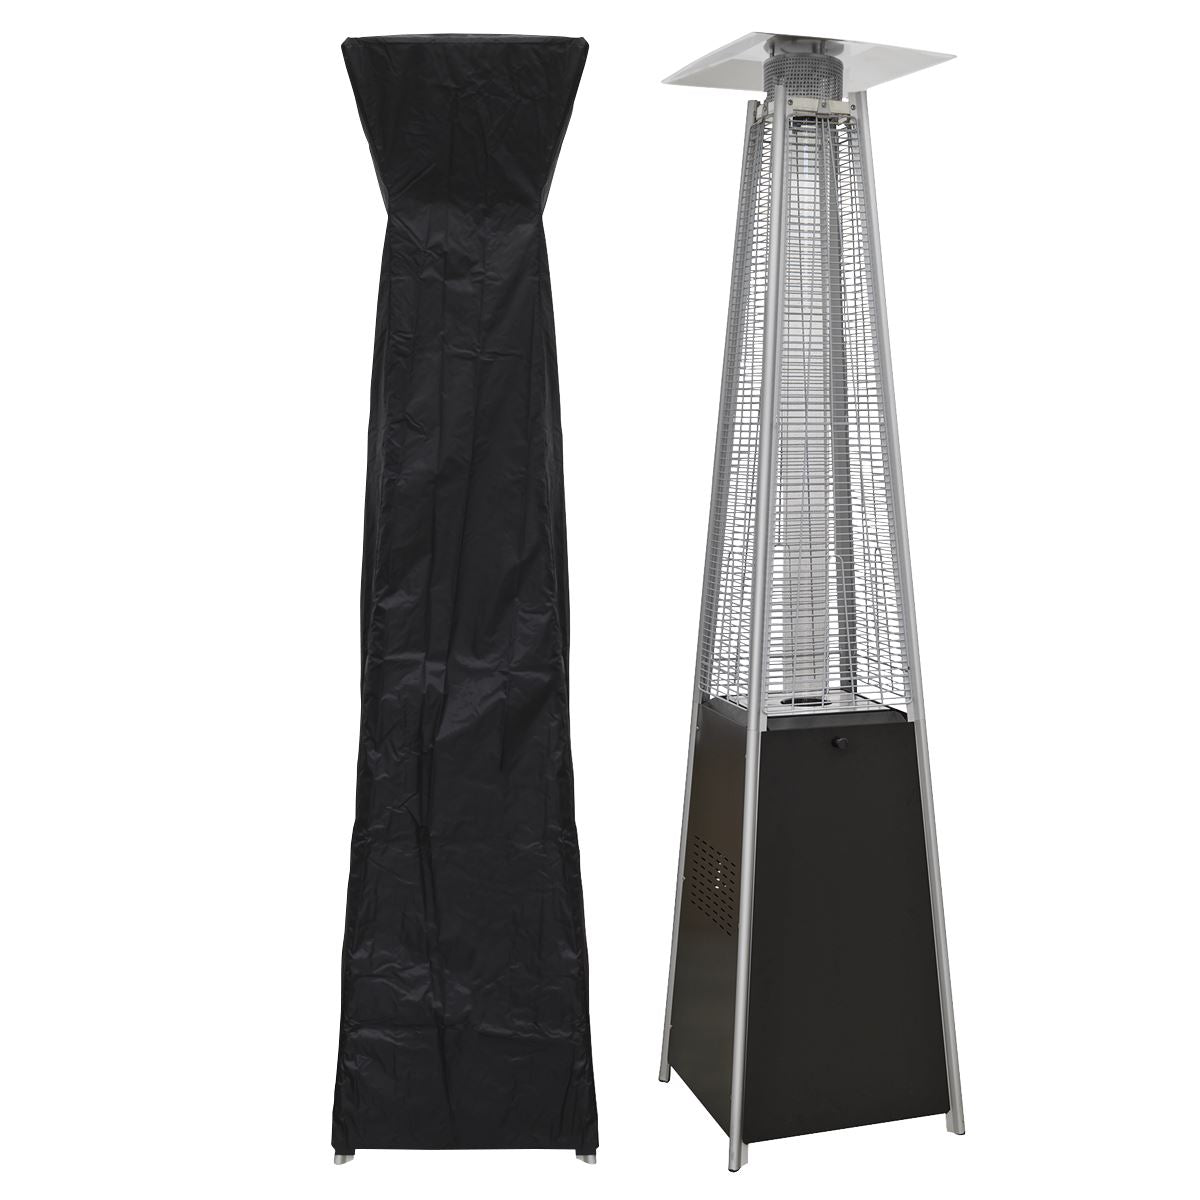 Dellonda Pyramid Gas Patio Heater 13kW for Commercial & Domestic Use, Supplied with Cover, Black